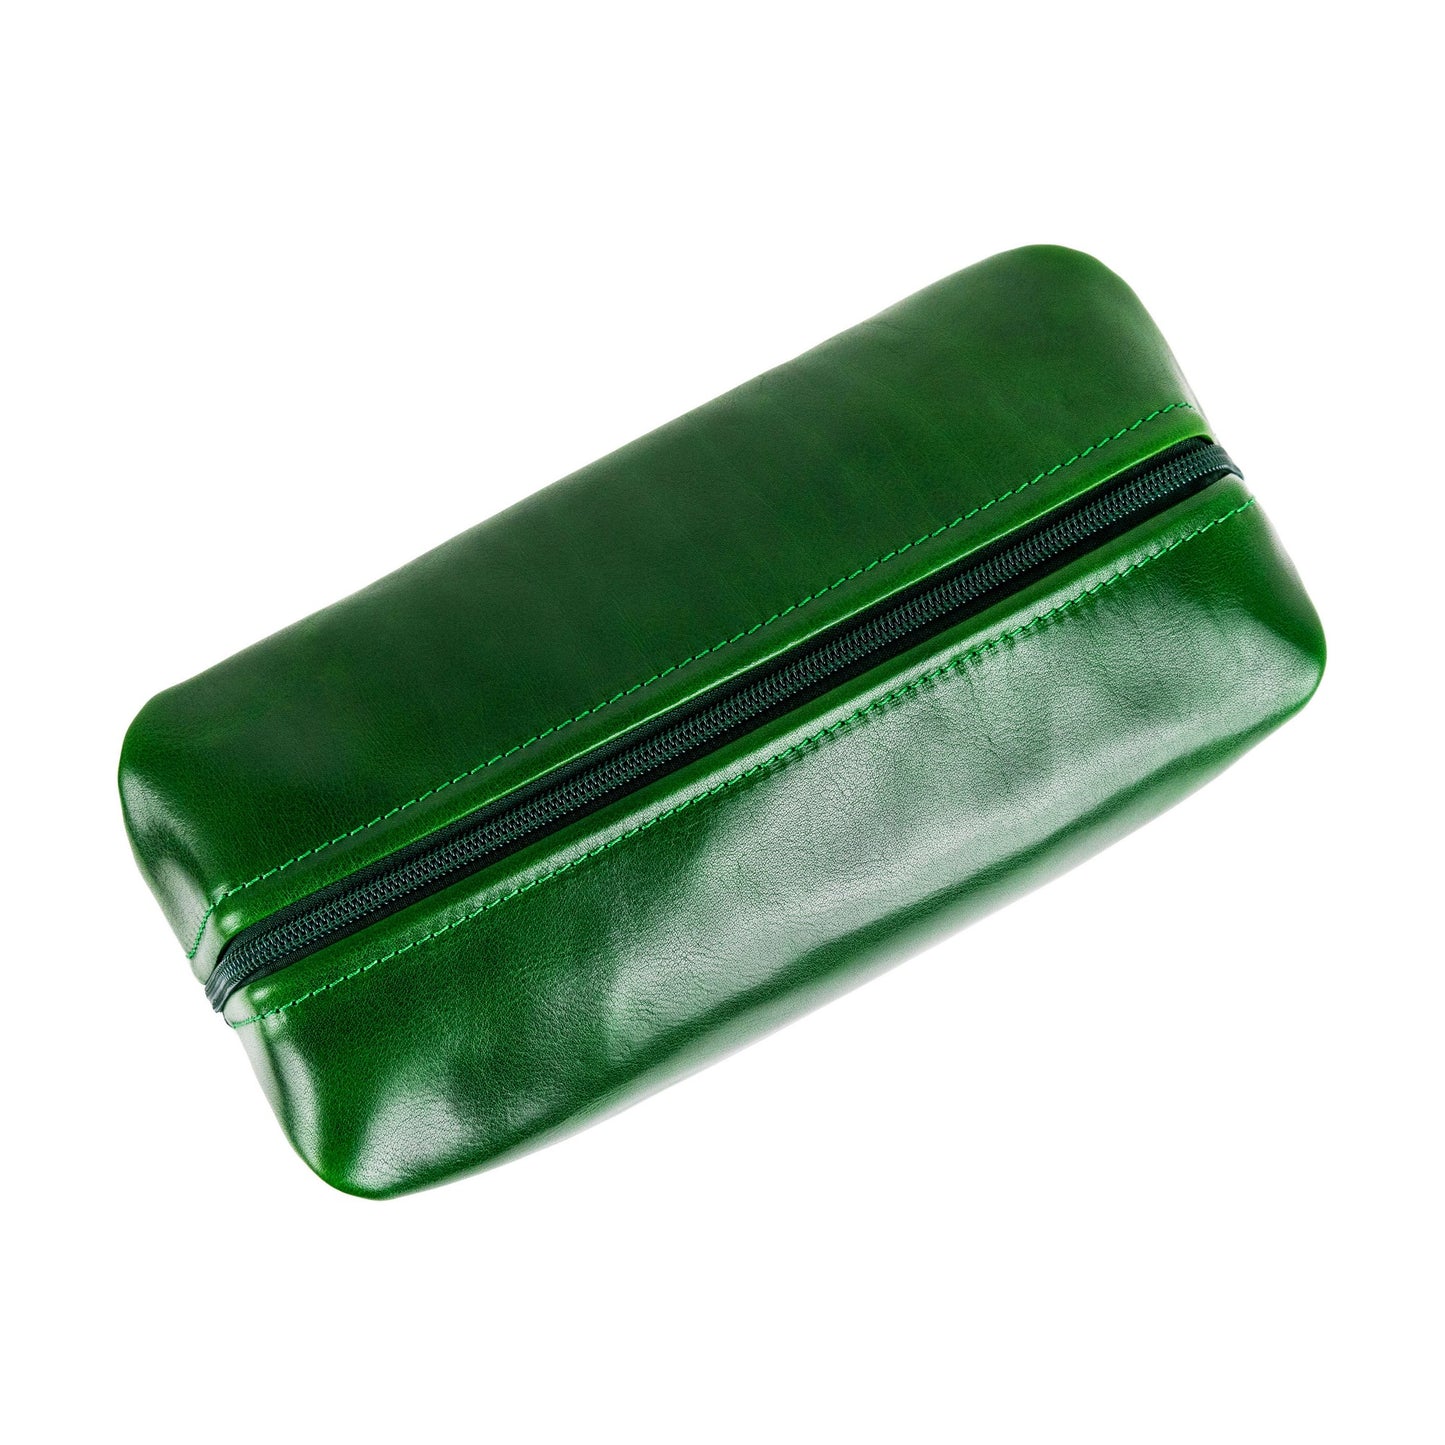 Leather Toiletry Bag - Four Past Midnight